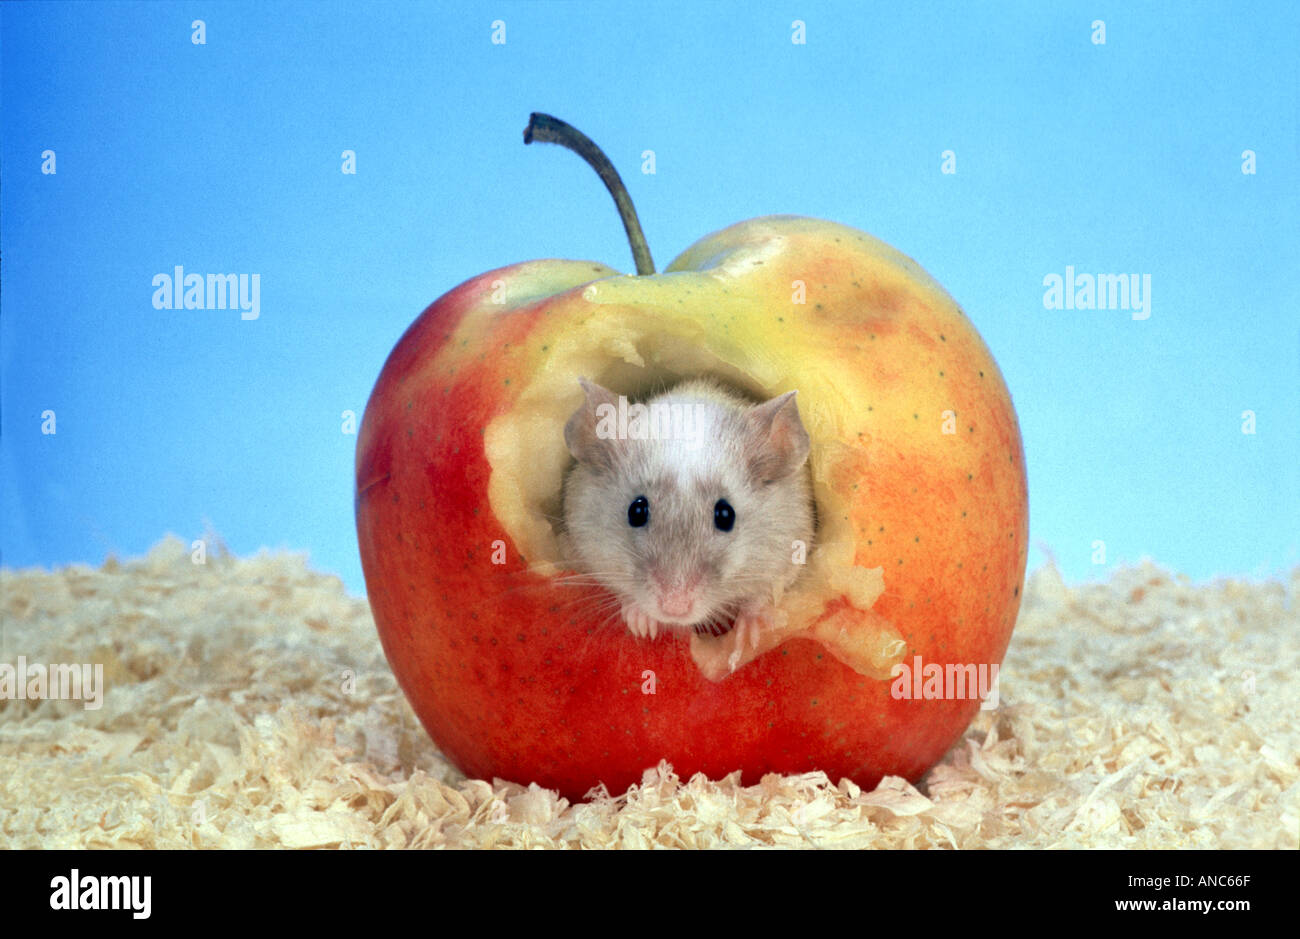 a mouse sitting in an apple hole FRONT SIDE humour joke fun funny animal Stock Photo